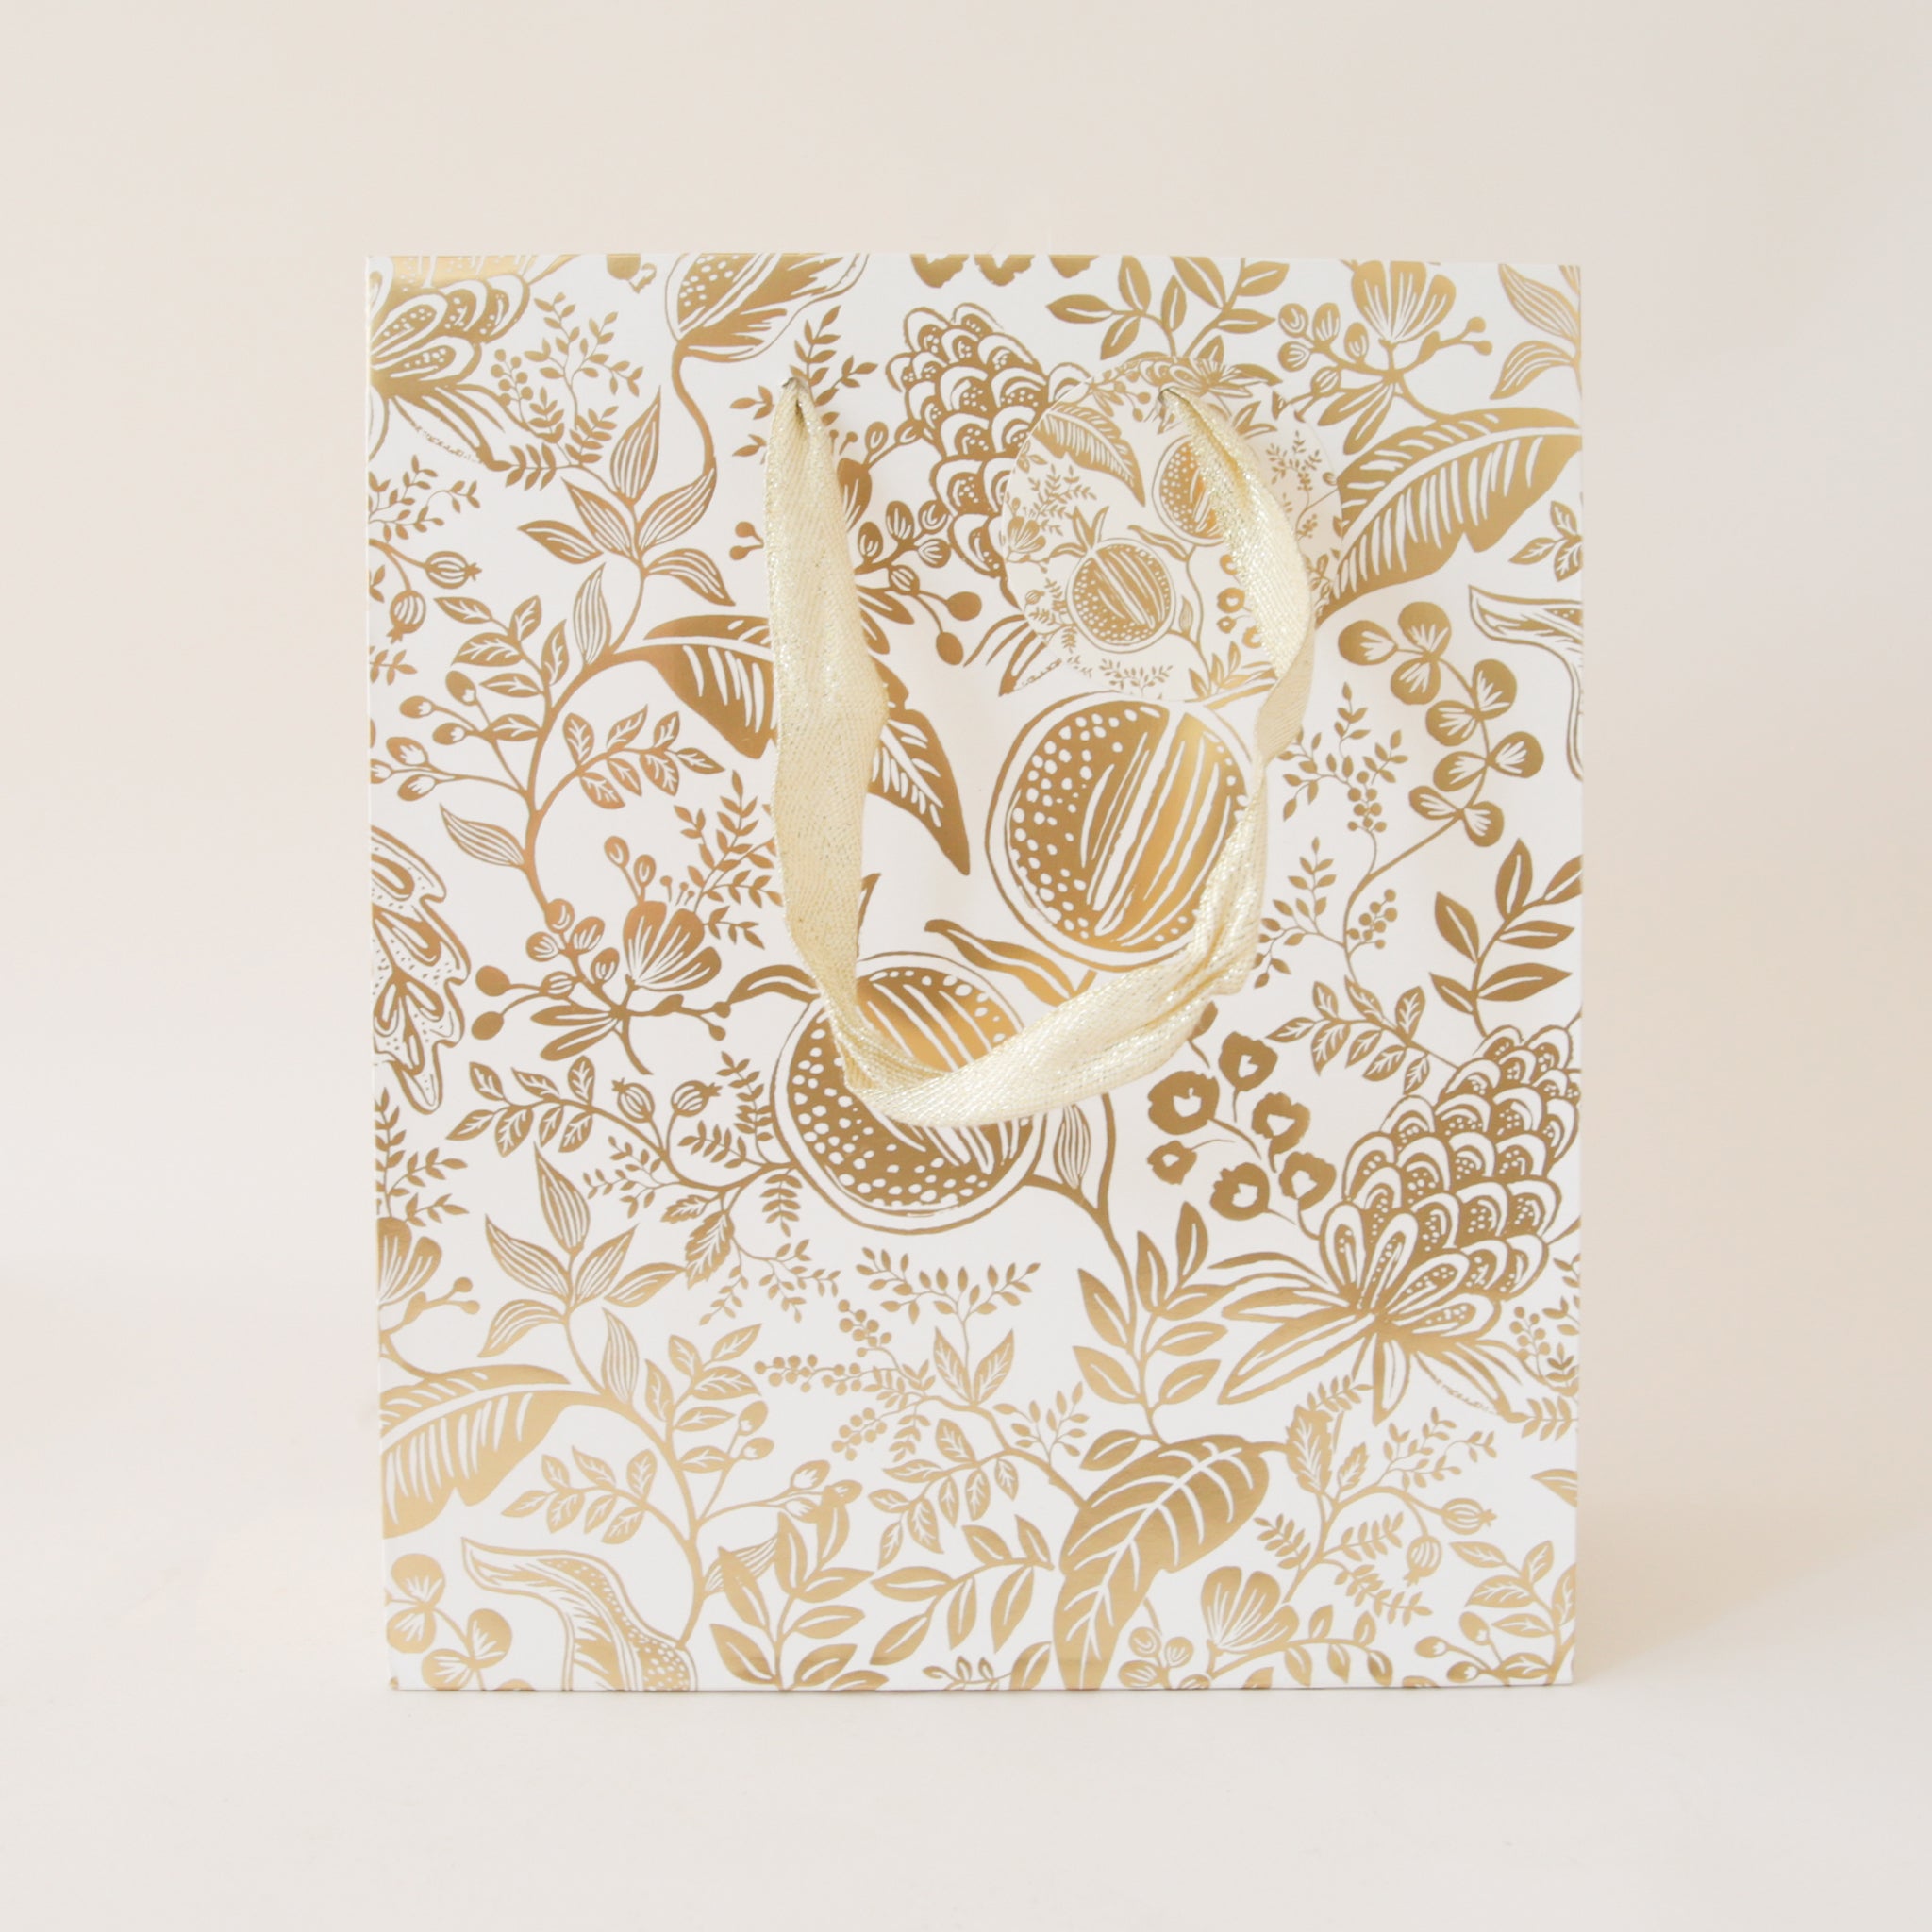 A gold foiled gift bag with metallic cotton handles and a to and from tag.